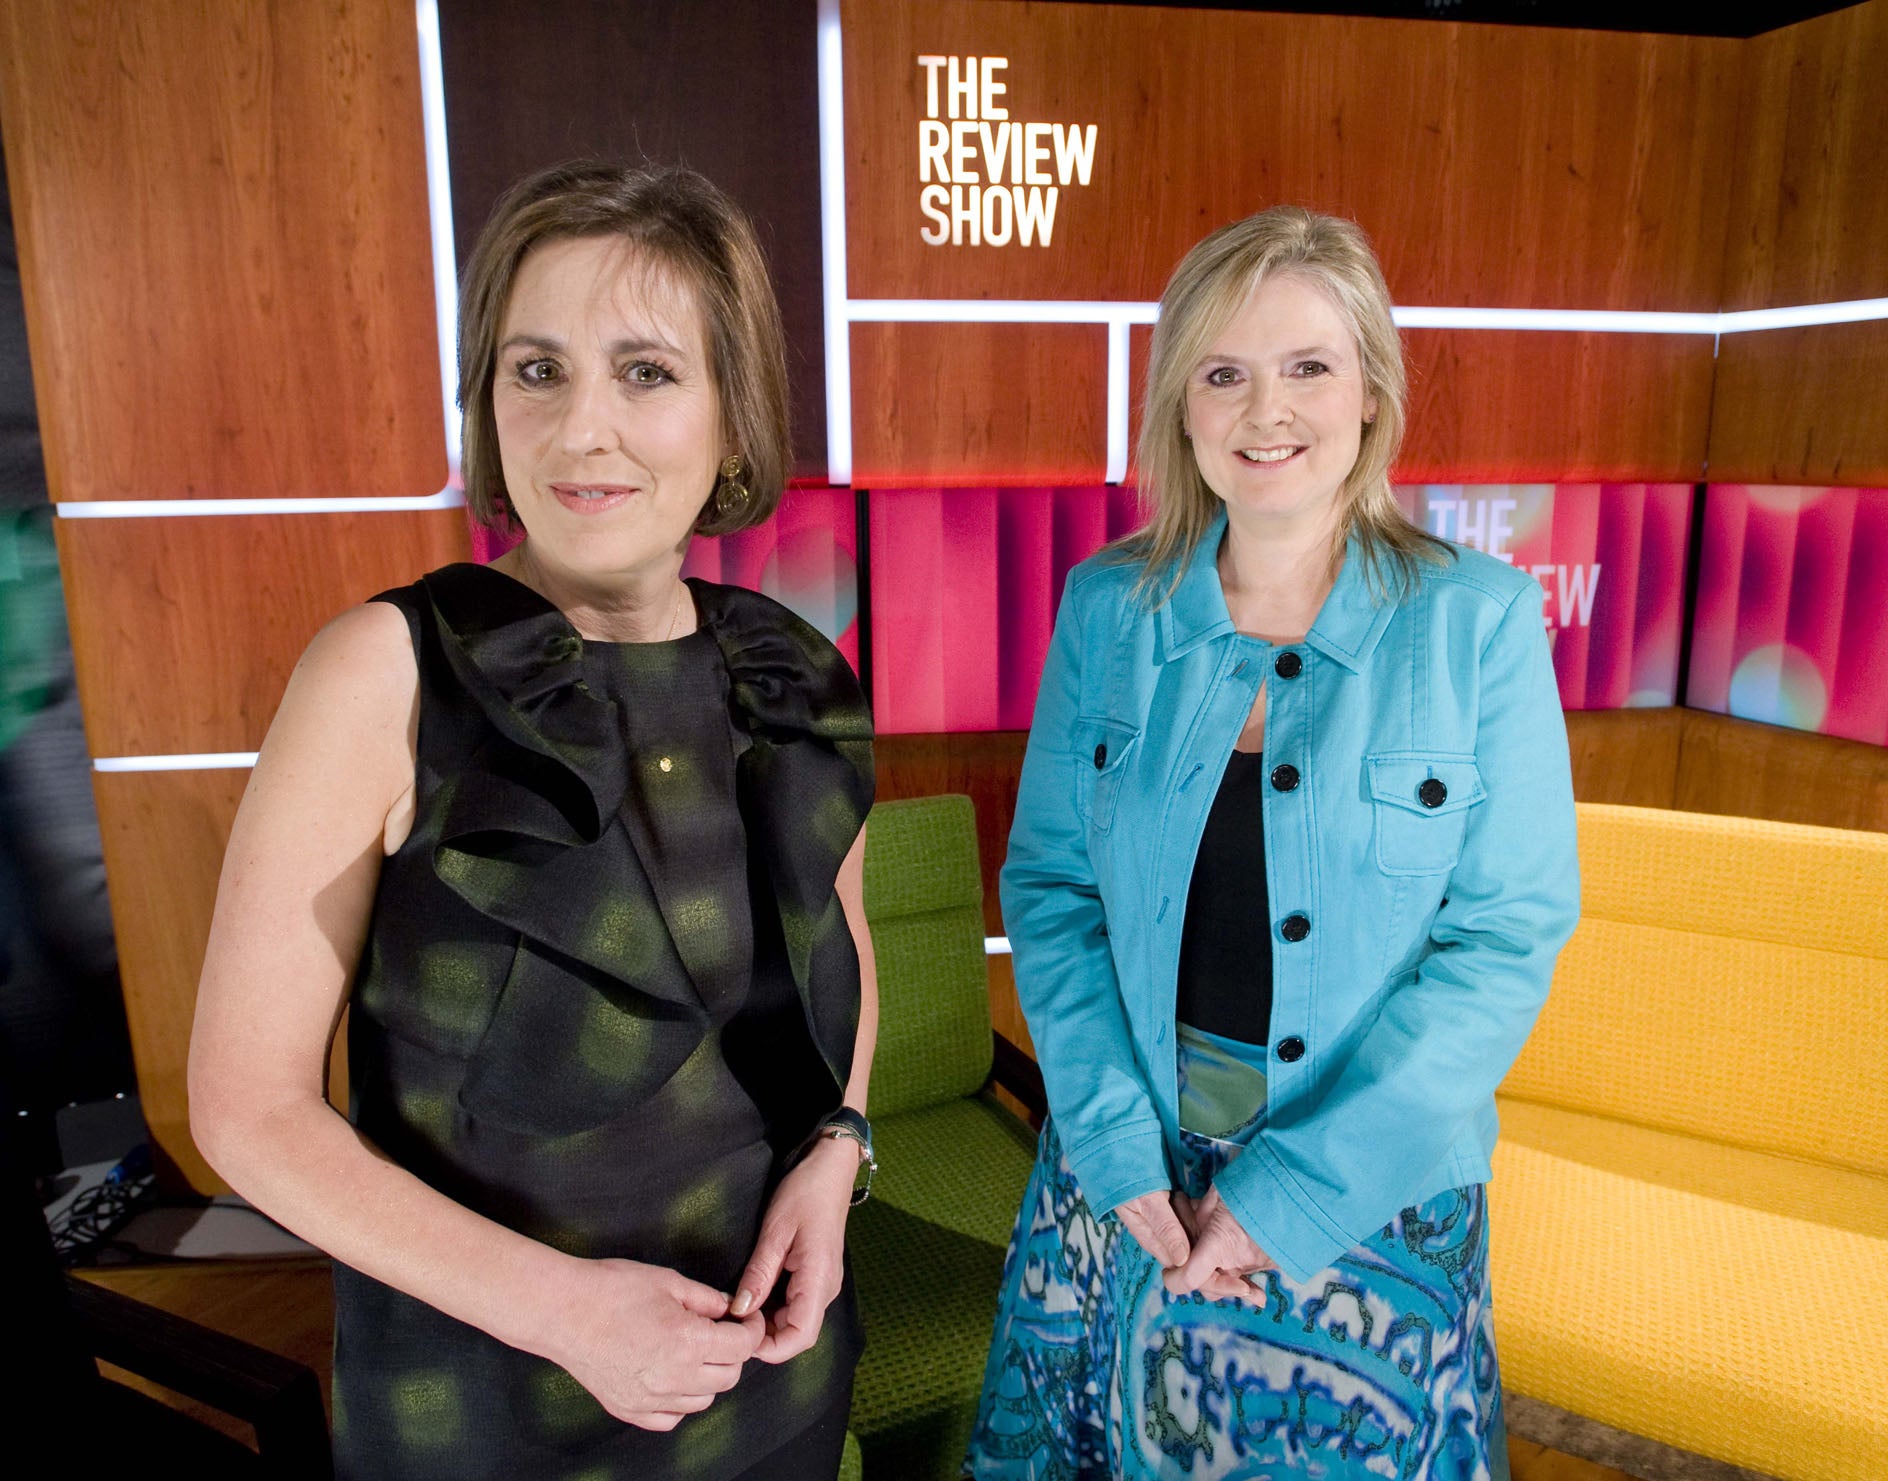 Kirsty Wark and Martha Kearney on The Review Show